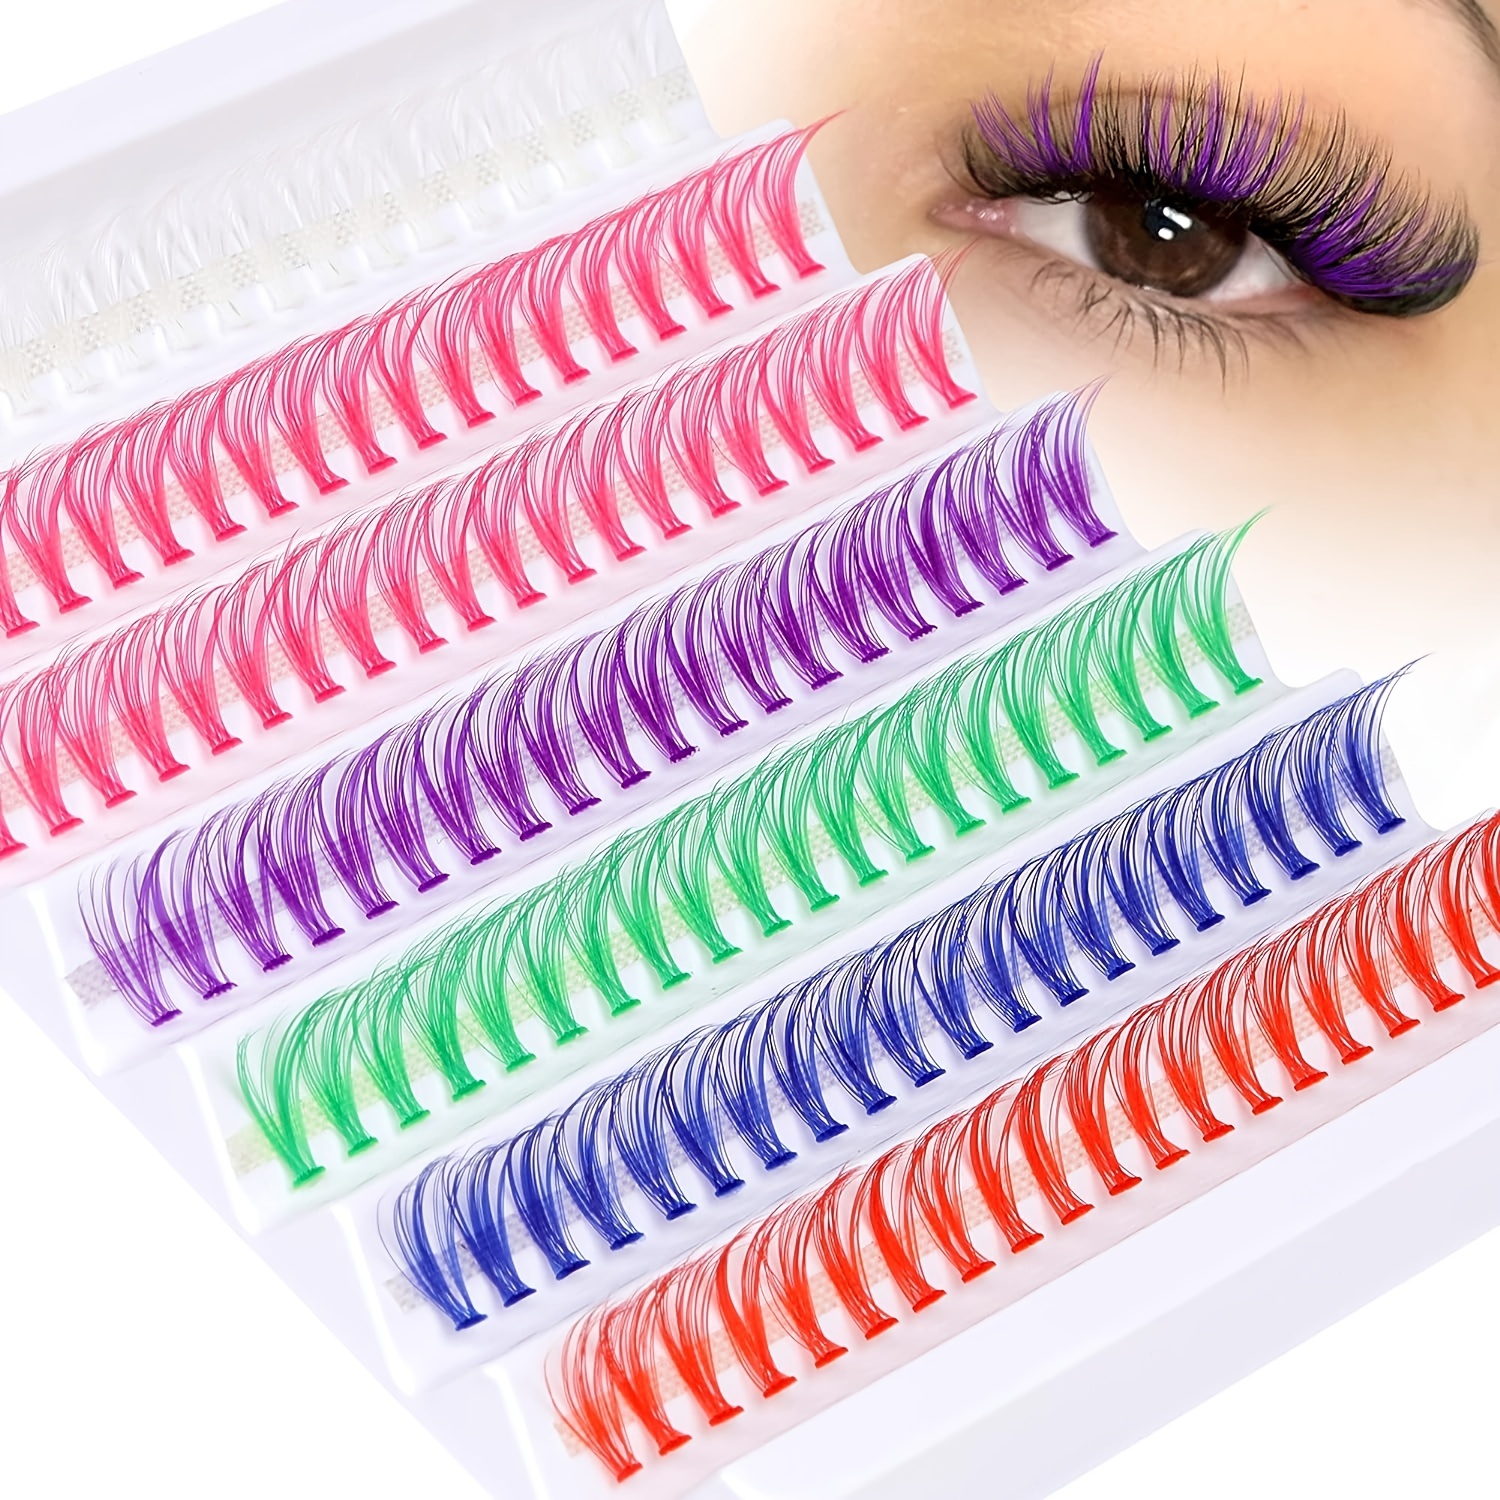 

140pcs Colorful Cluster Lashes, Personal Flared Lashes Cc Curling Lash Cluster Diy Eyelash Extension Colored Lashes For Halloween Party Stage Makeup